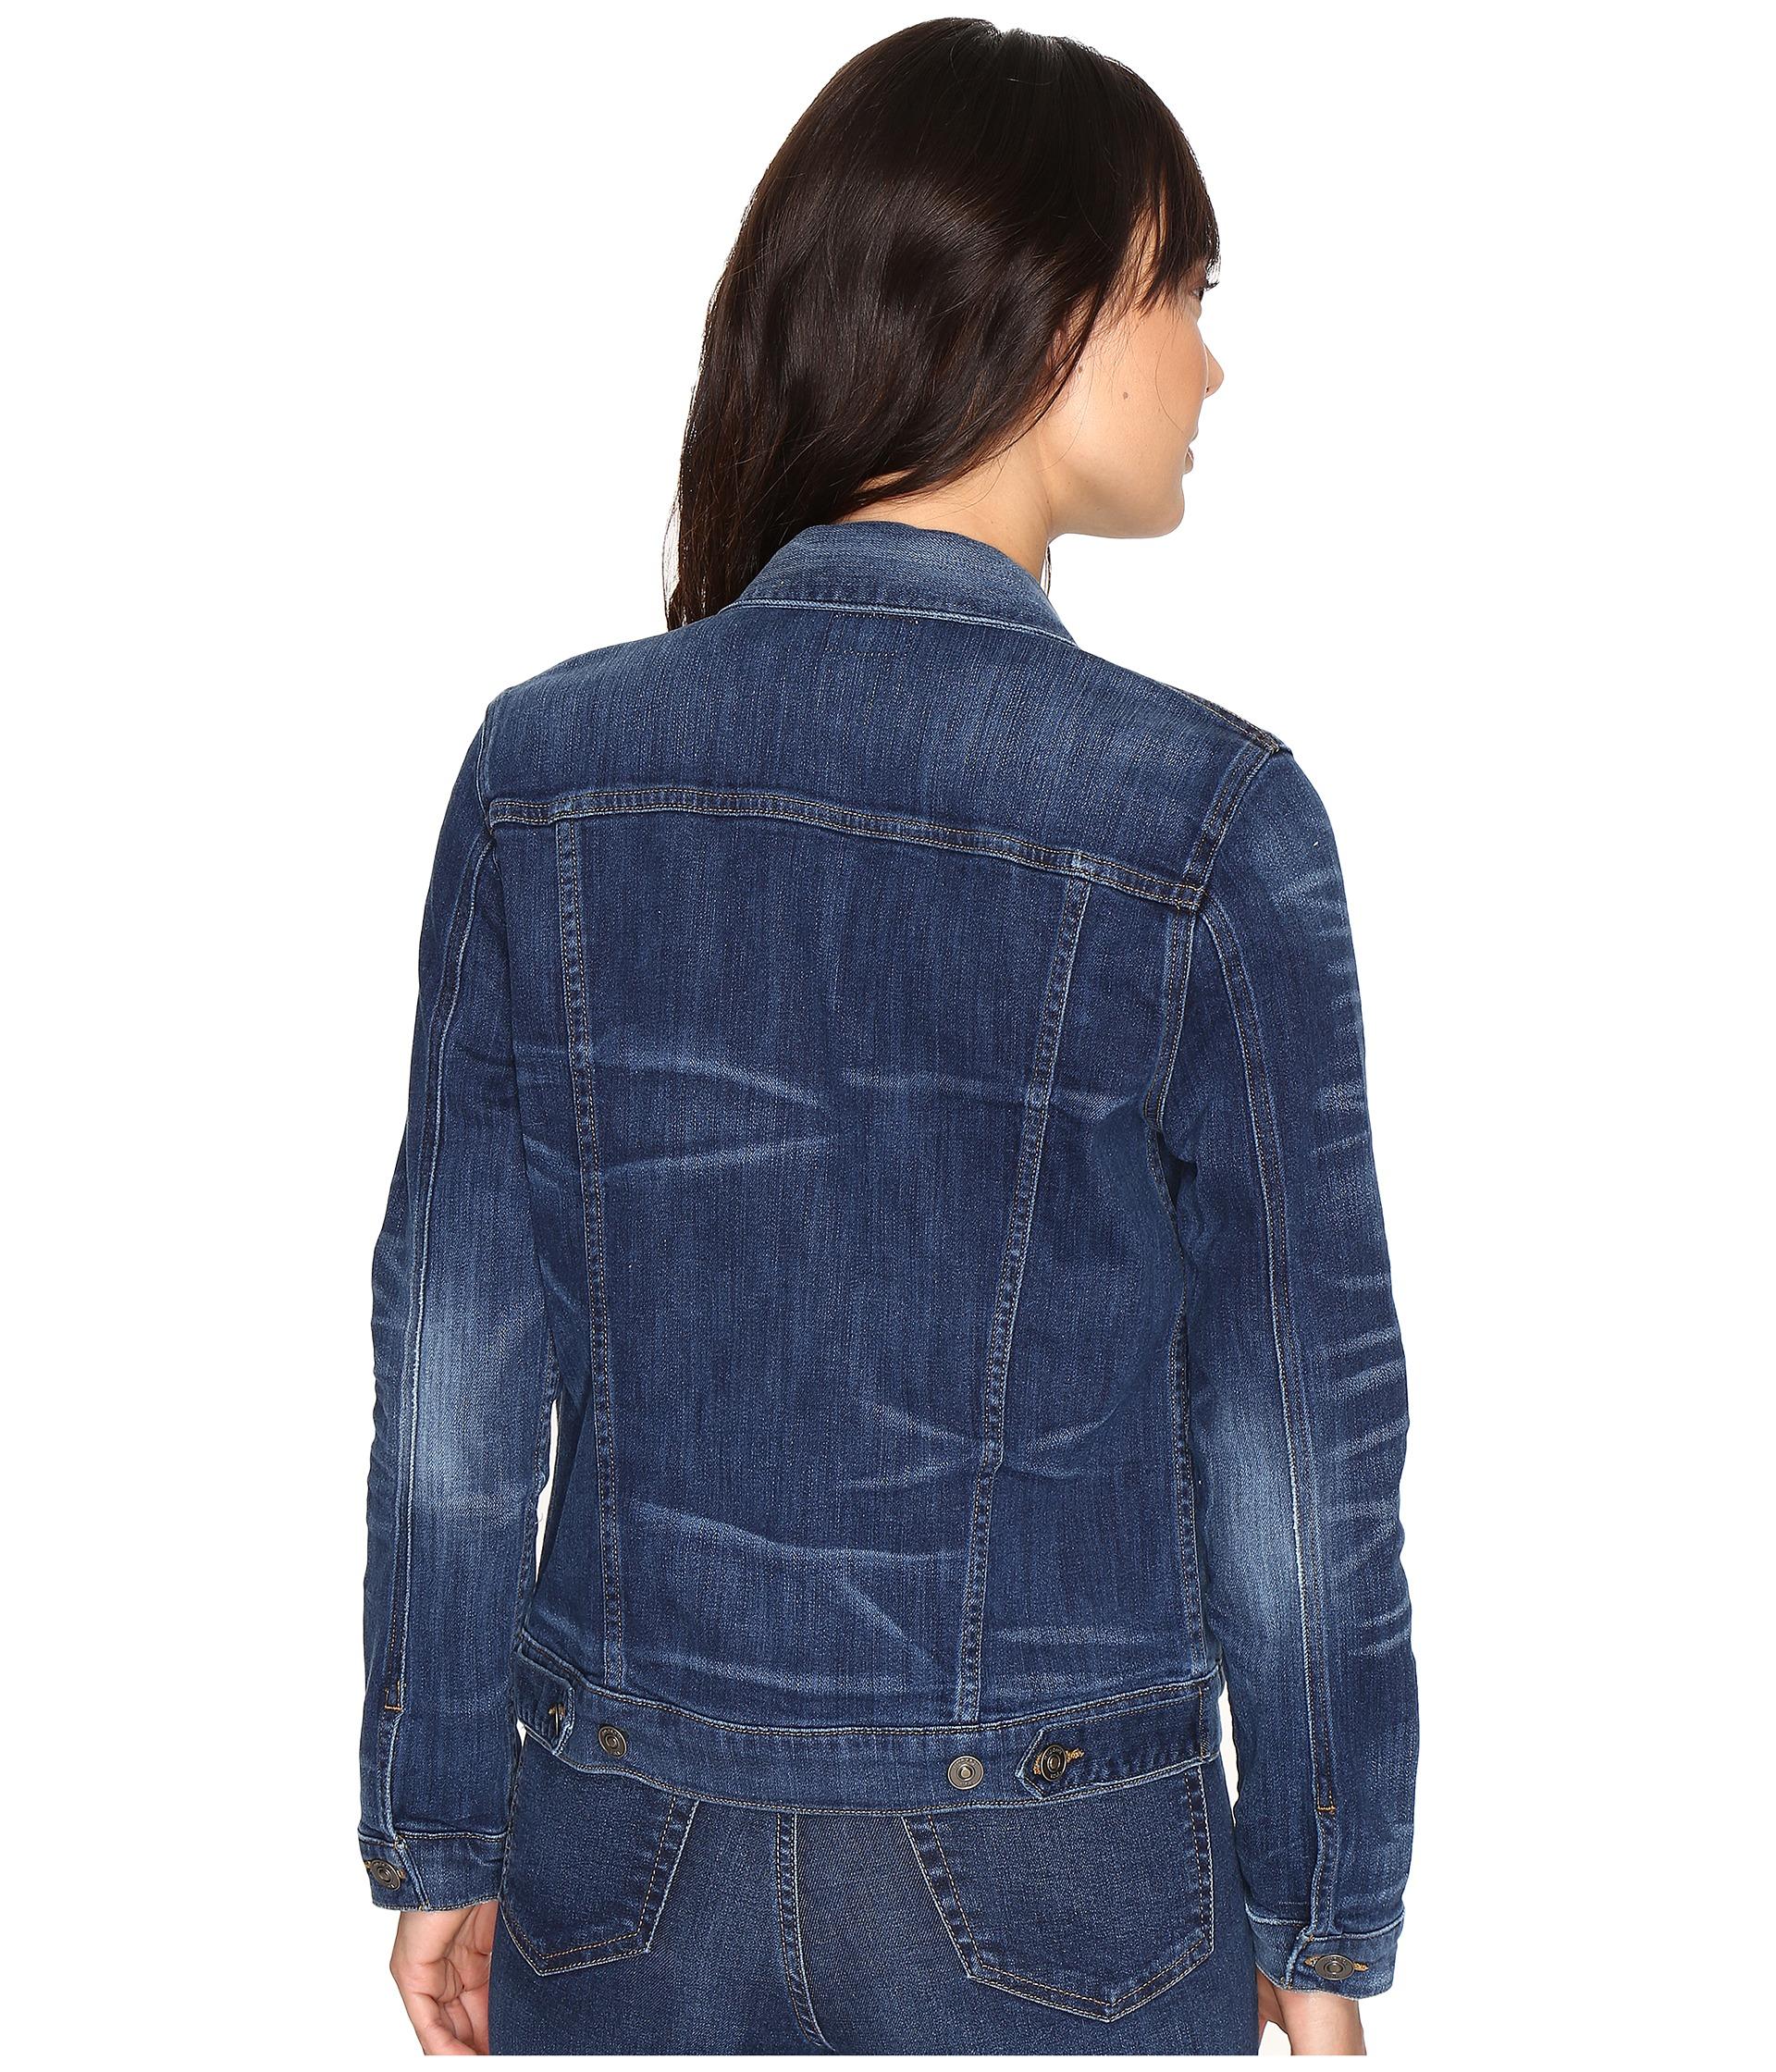 Lyst - Hudson Jeans The Classic Denim Jacket In Alliance in Blue